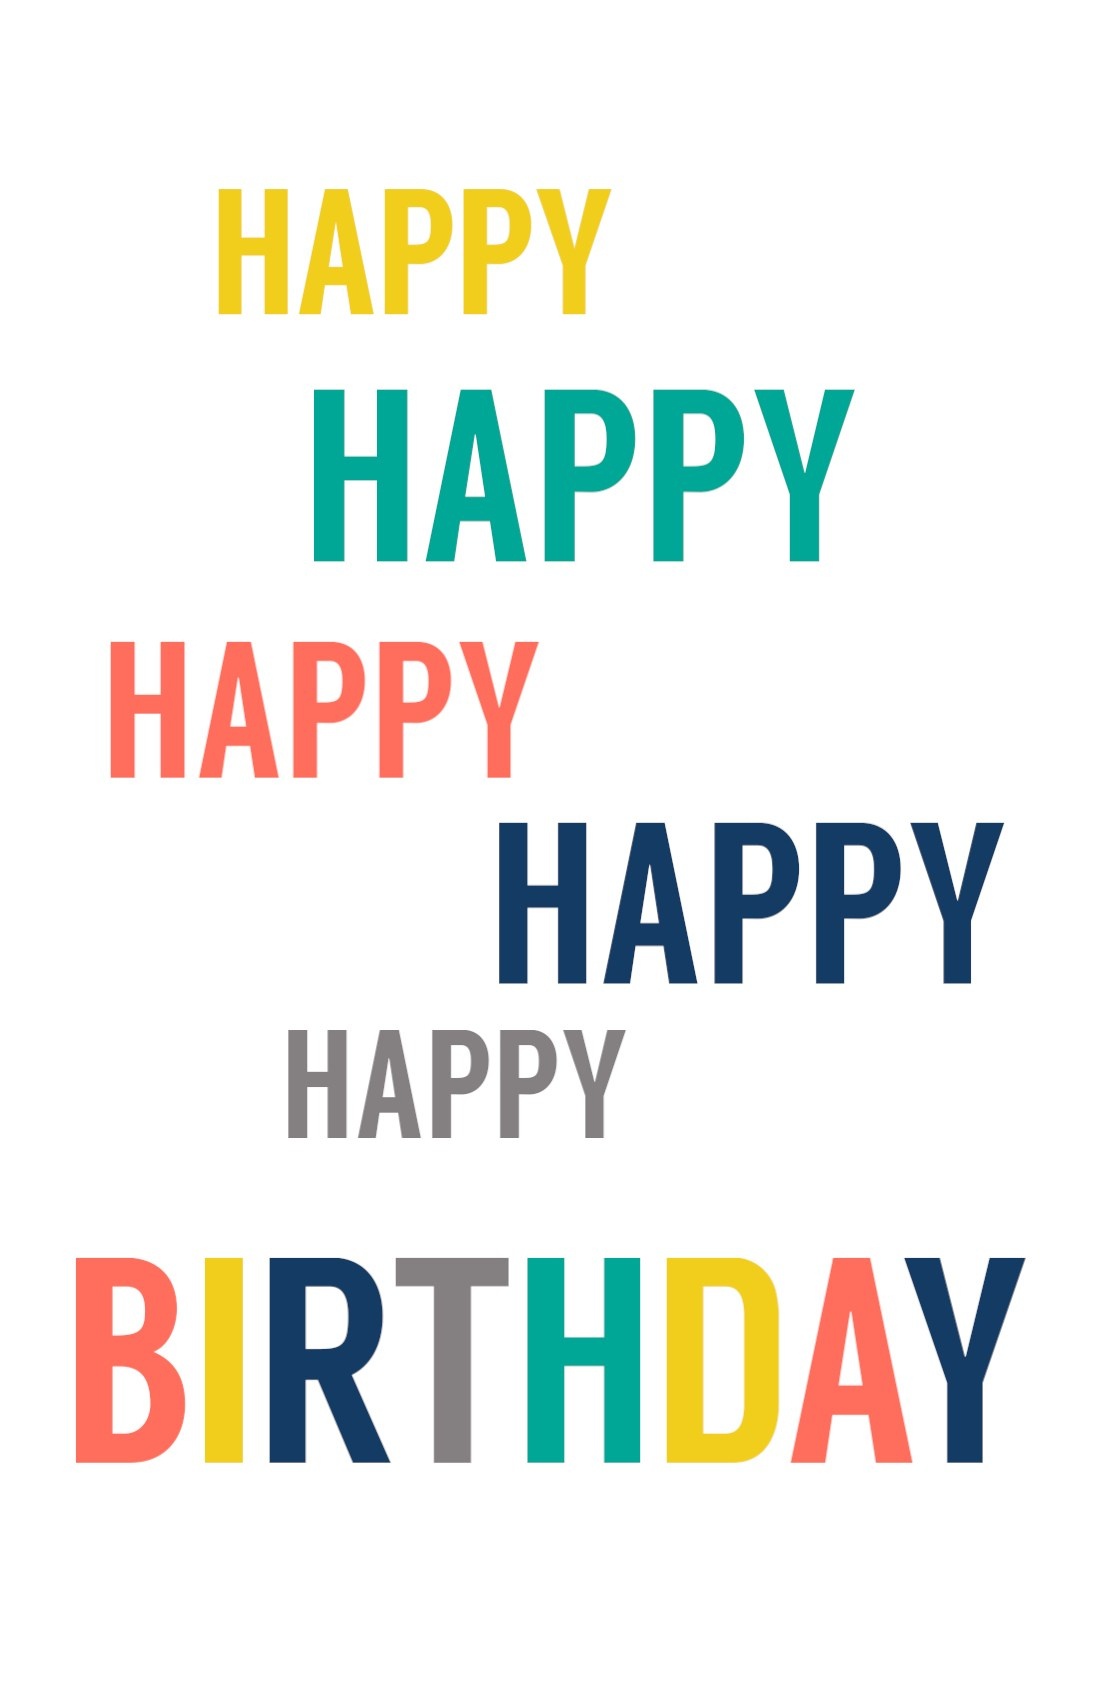 Free Printable Birthday Cards - Paper Trail Design - Free Printable Bday Cards